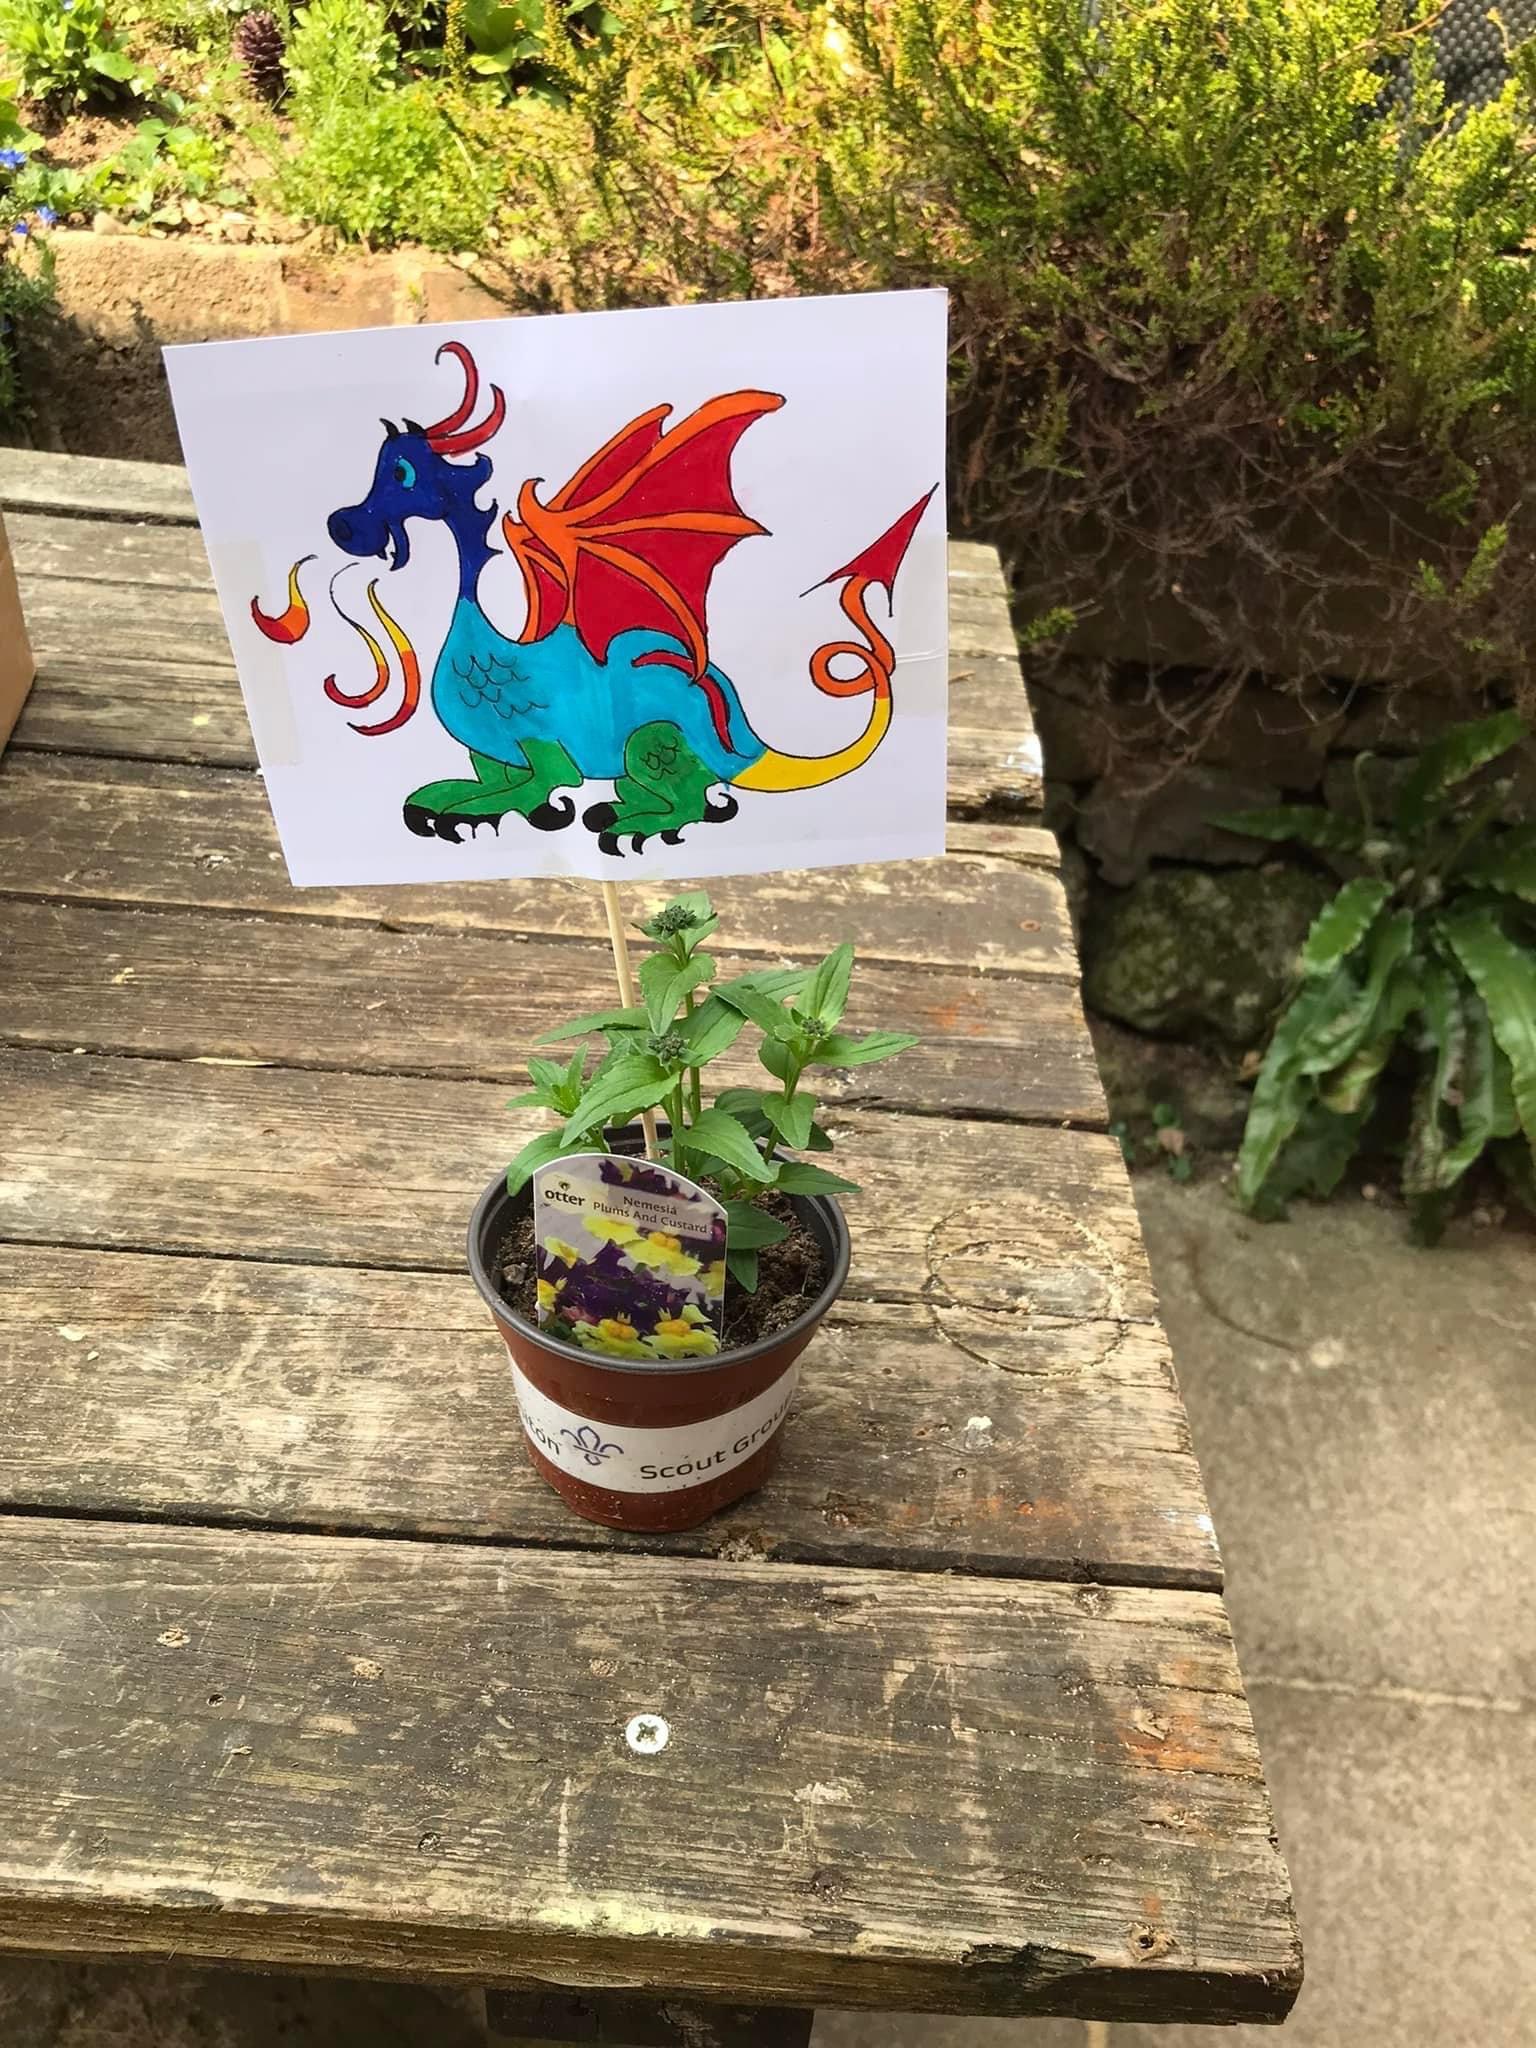 A potted plant made by the Scouts with a picture of a dragon stuck into it on a bamboo stick. The dragon has been coloured in red, blue, green and yellow by the Scouts